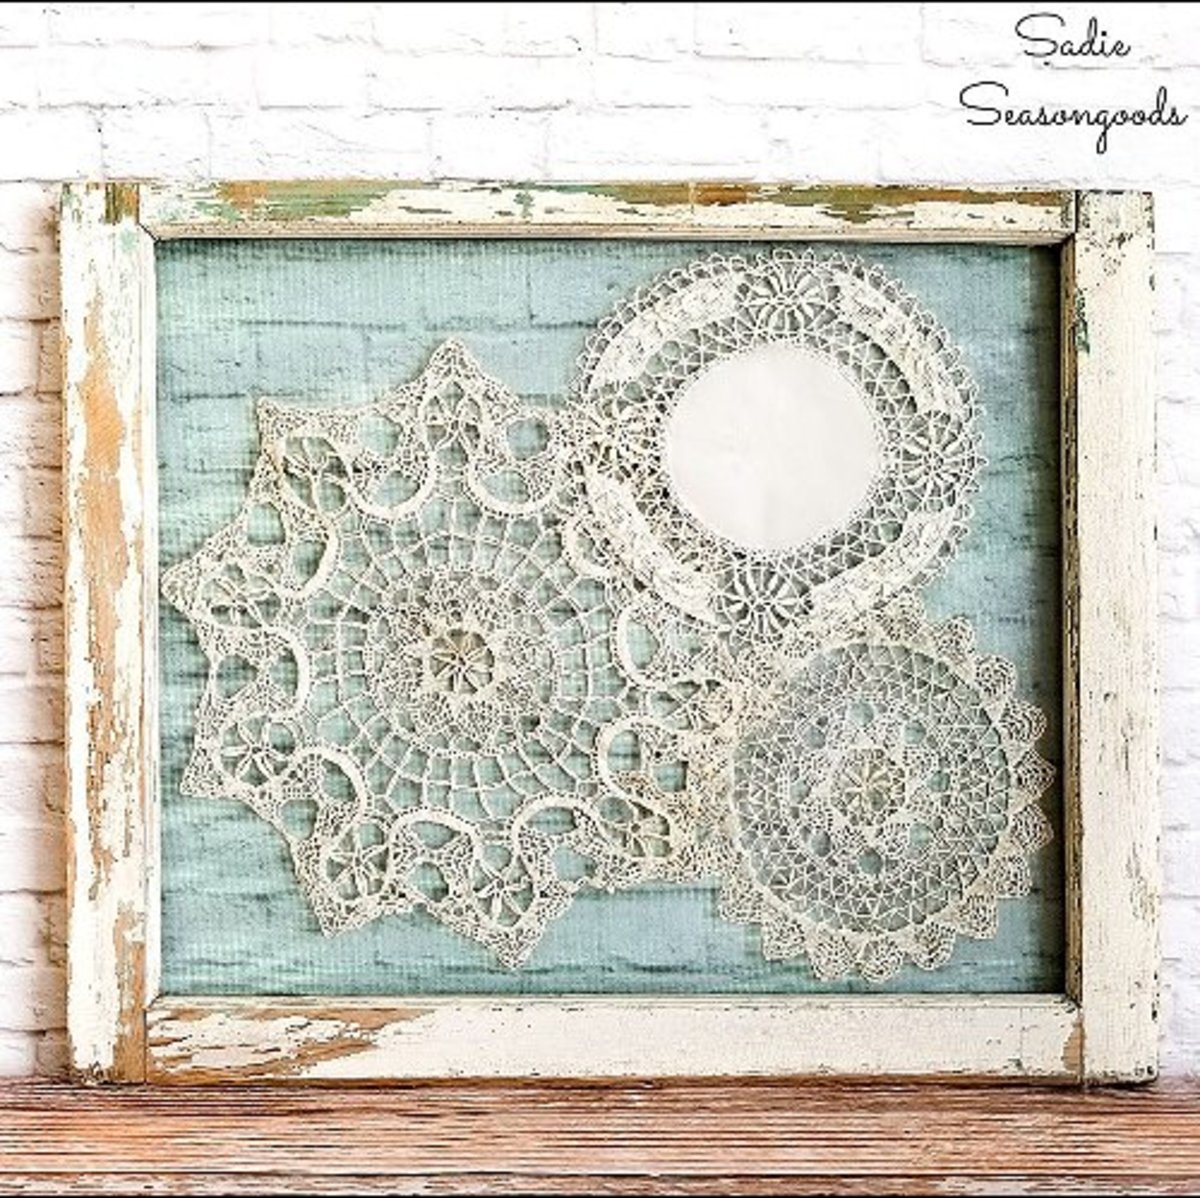 textile art embellish bohemian Cotton lace crochet doily collage mixed media craft supply 3 Hand dyed vintage purple turquoise DIY